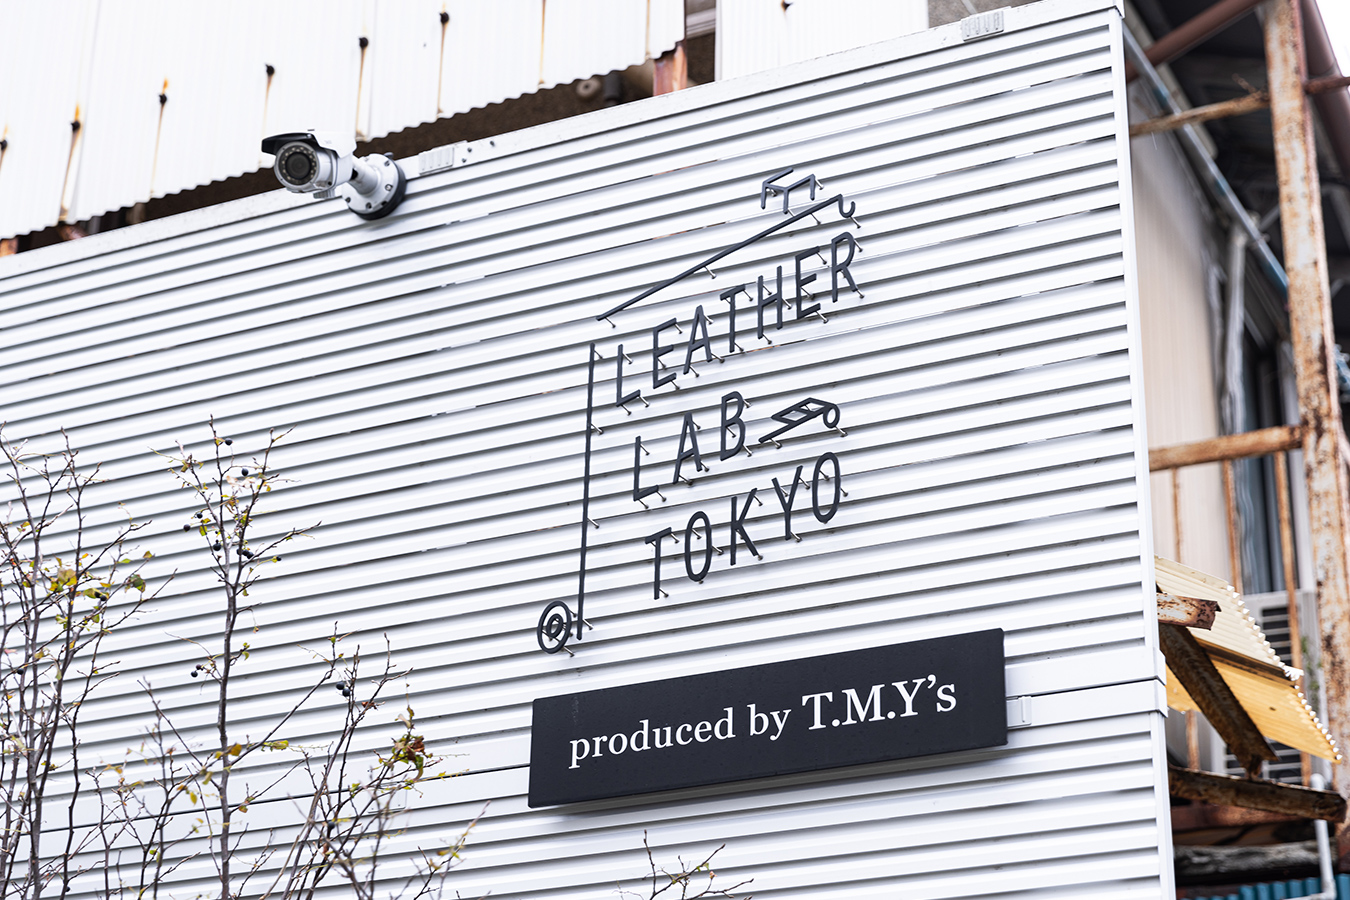 「LEATHER LAB TOKYO produced by T.M.Y’s」